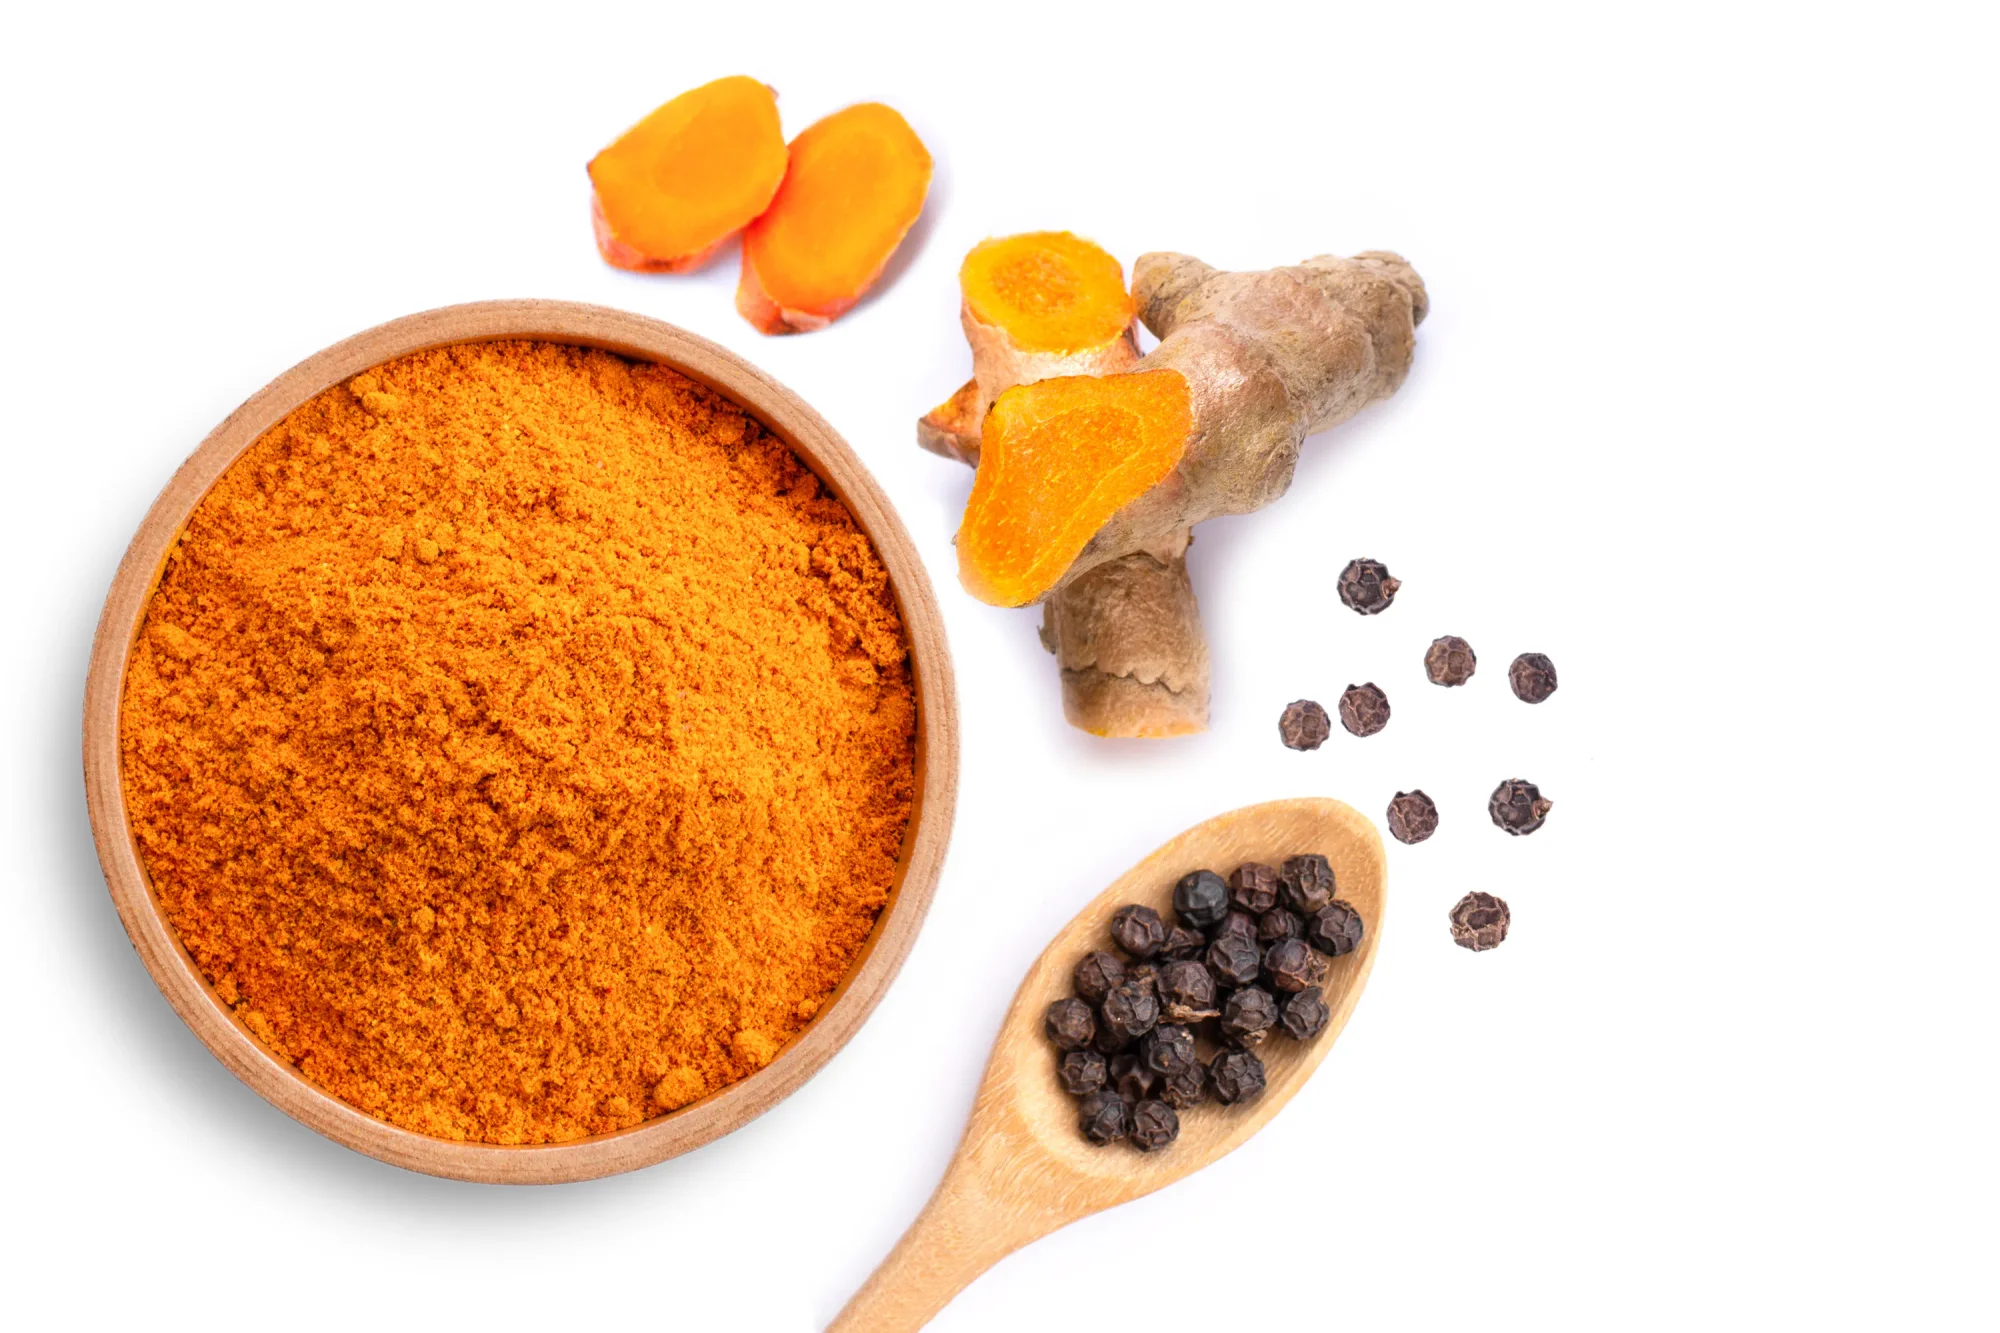 Curcumin powder (turmeric ground, turmeric, Curcuma) in a wooden bowl and black peppercorns in a spoon isolated on white background. Health benefits and antioxidant food concept. Top view. Flat lay.